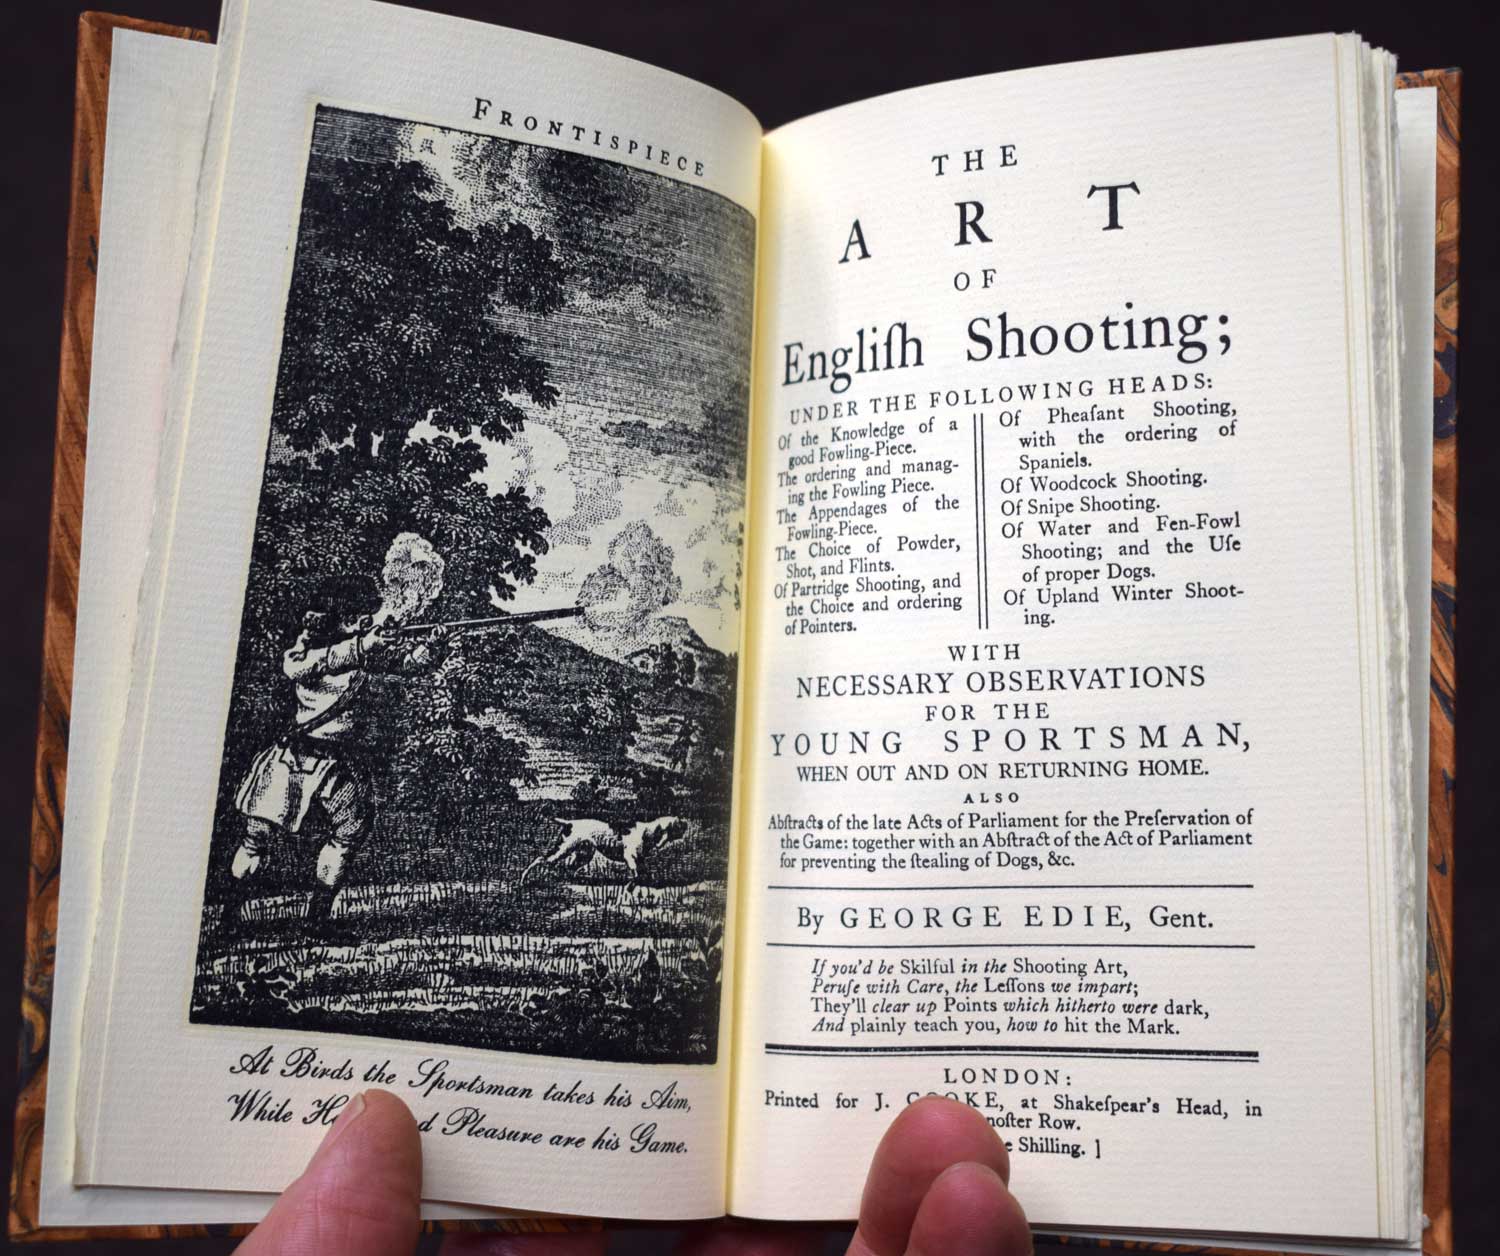 The Art of English Shooting. Limited edition.